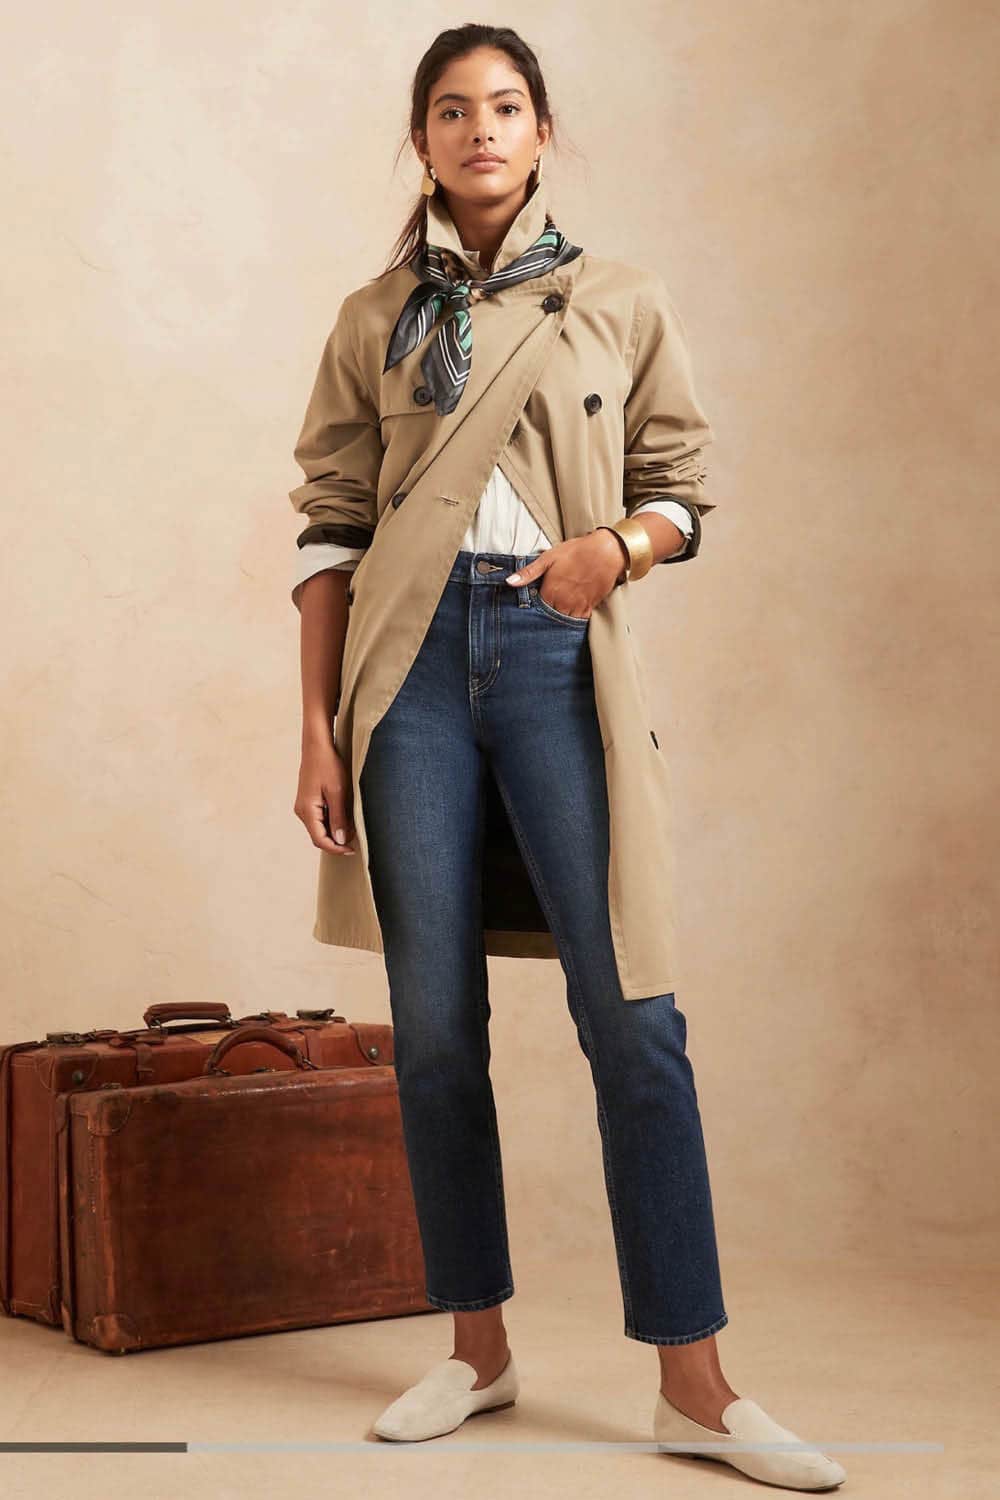 Trending Jeans — Best Denim Styles For Fall - House Of Hipsters